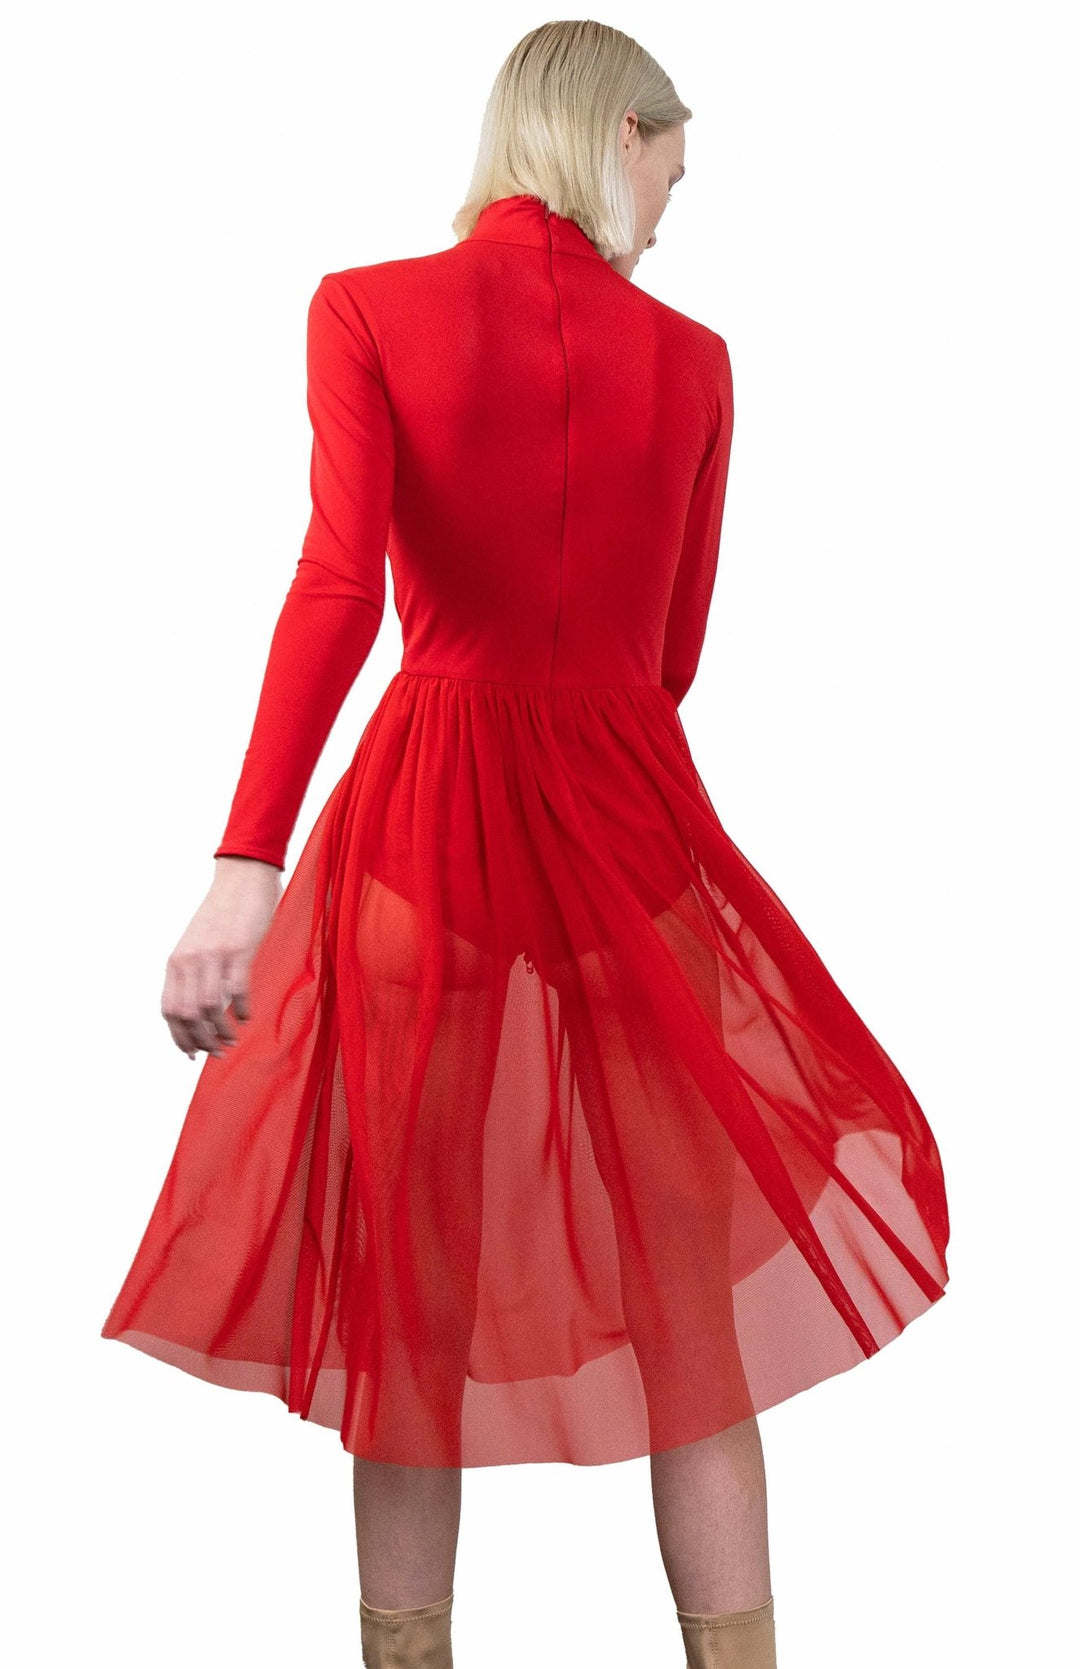  Flirty, Red, ballerina style, bodysuit dress, with long sleeves, turtleneck and gathered sheer skirt below the knee.